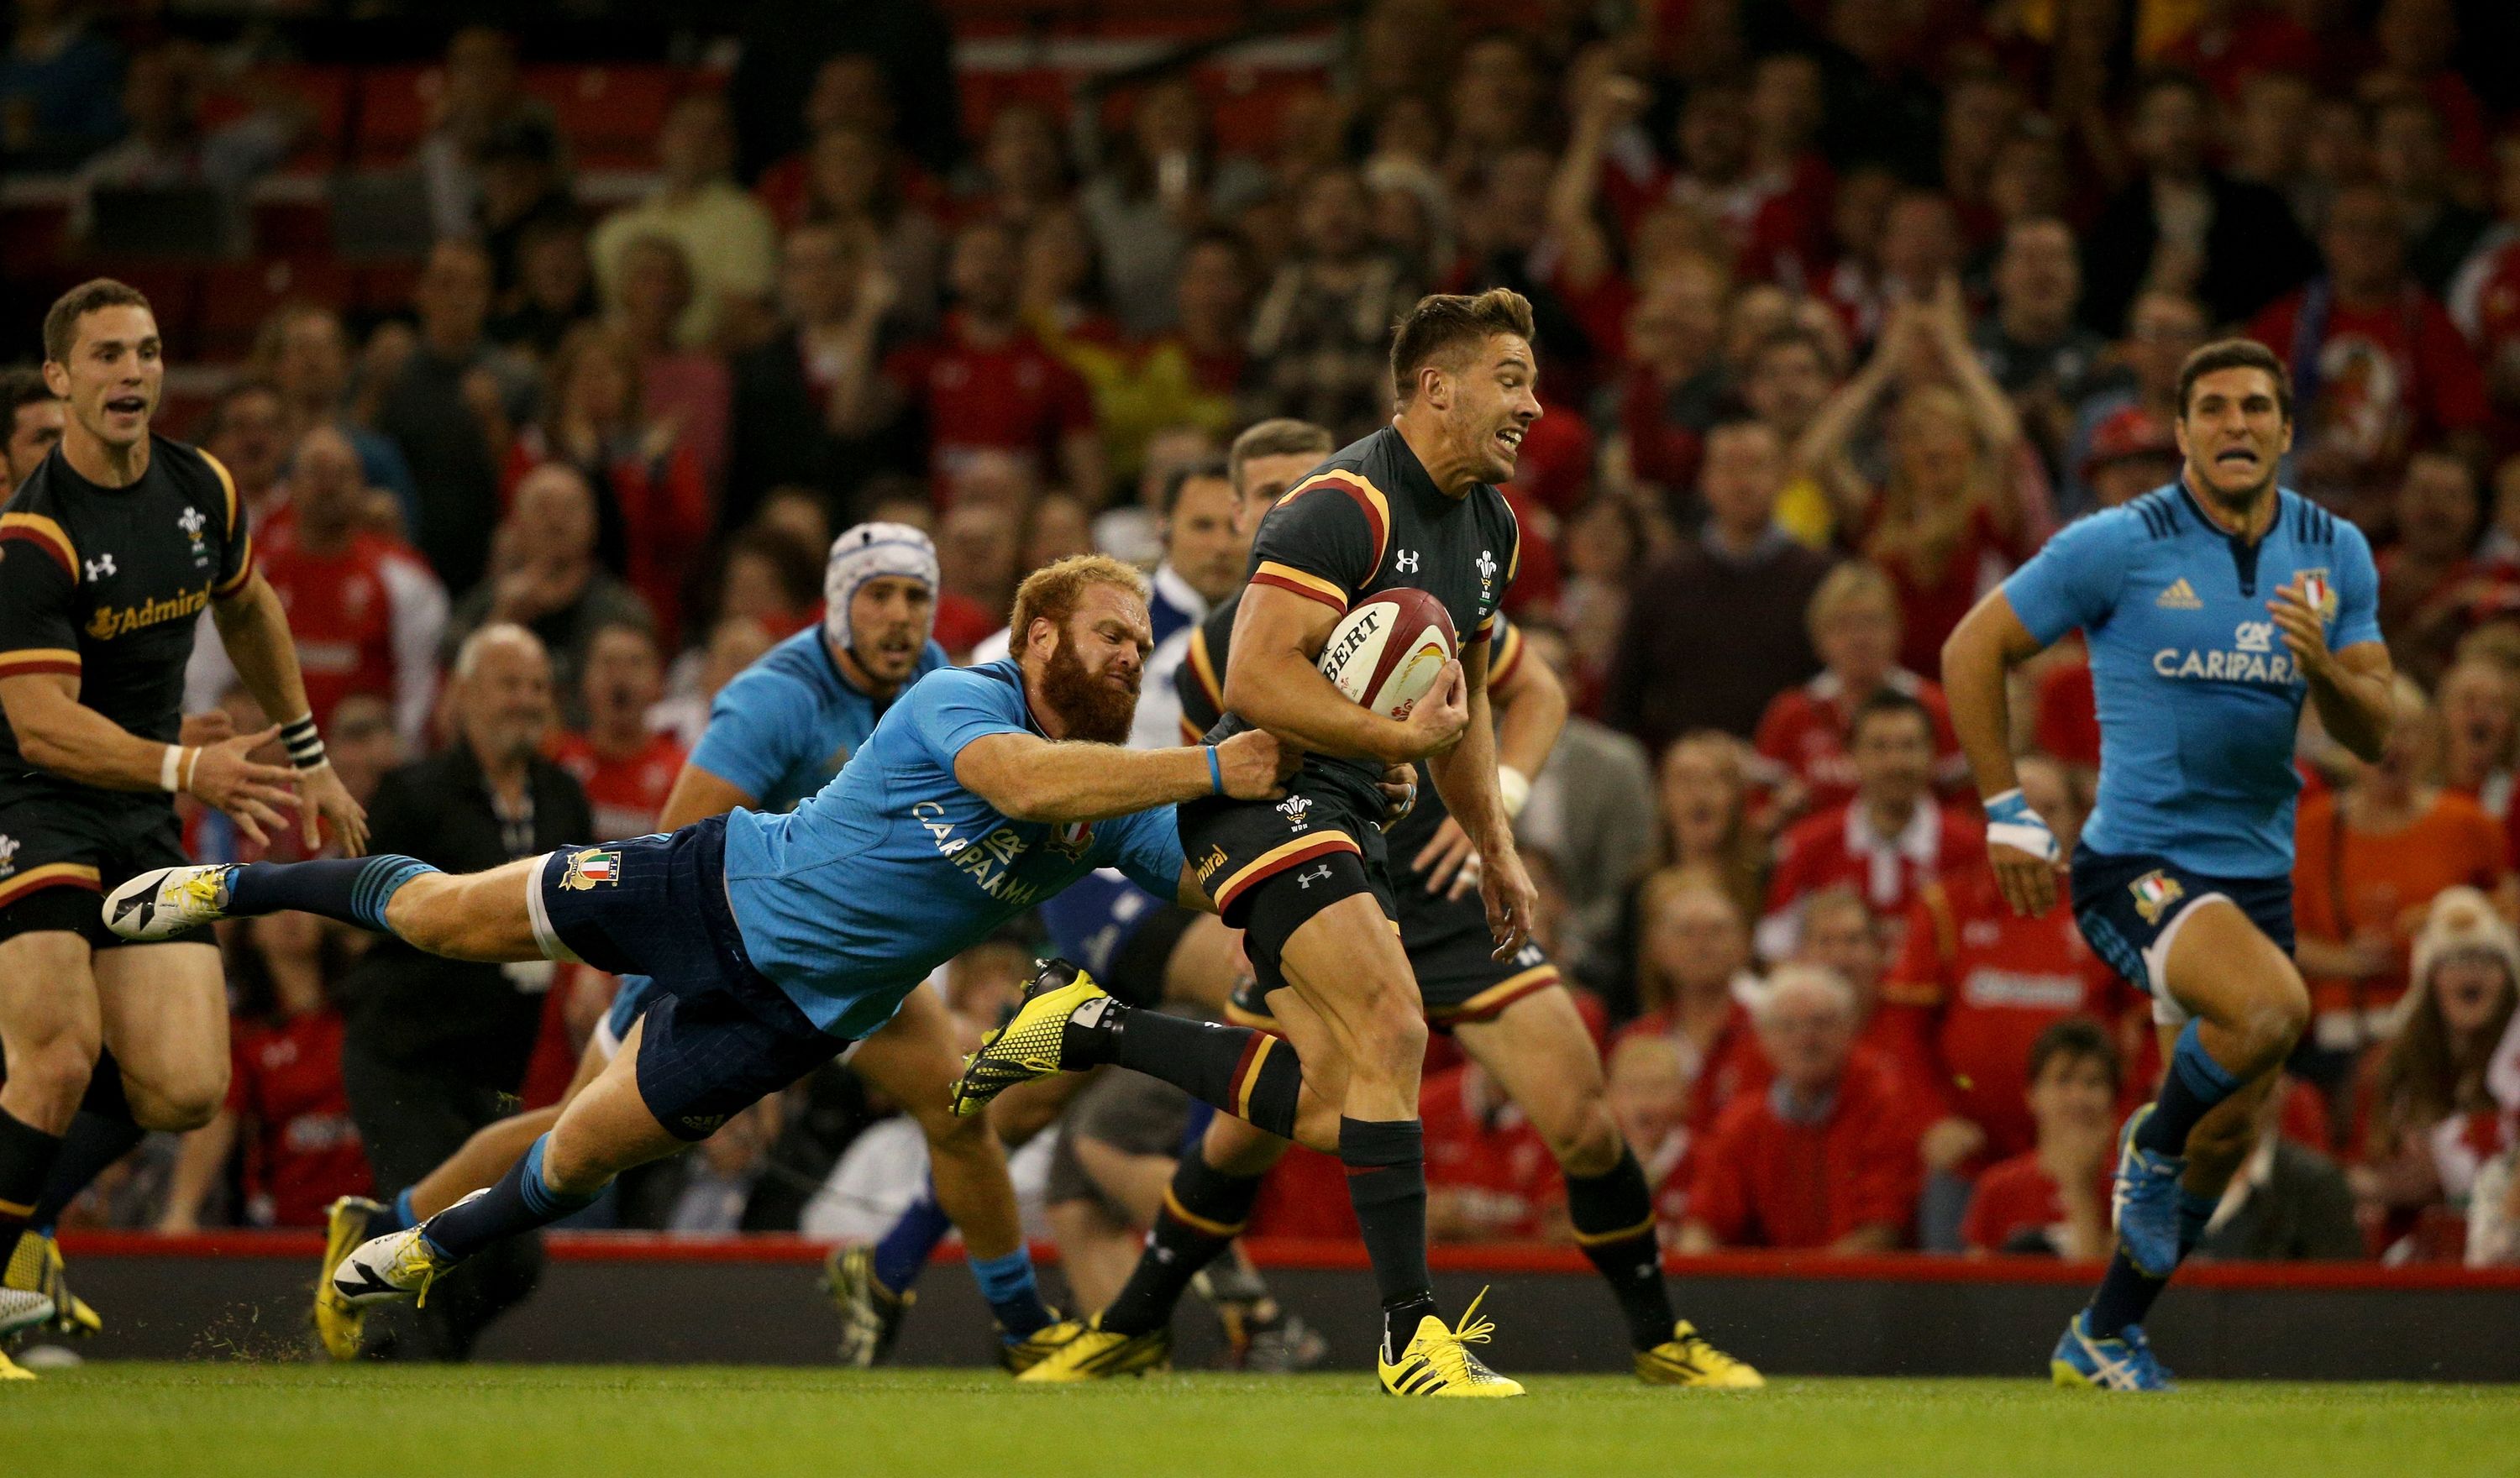 CARDIFF, WALES - SEPTEMBER 05:  Wales player Rhys Webb breaks the tackle of Gonzalo Garcia of Italy during the International match between Wales and Ireland at Millennium Stadium on September 5, 2015 in Cardiff, Wales.  (Photo by Stu Forster/Getty Images)